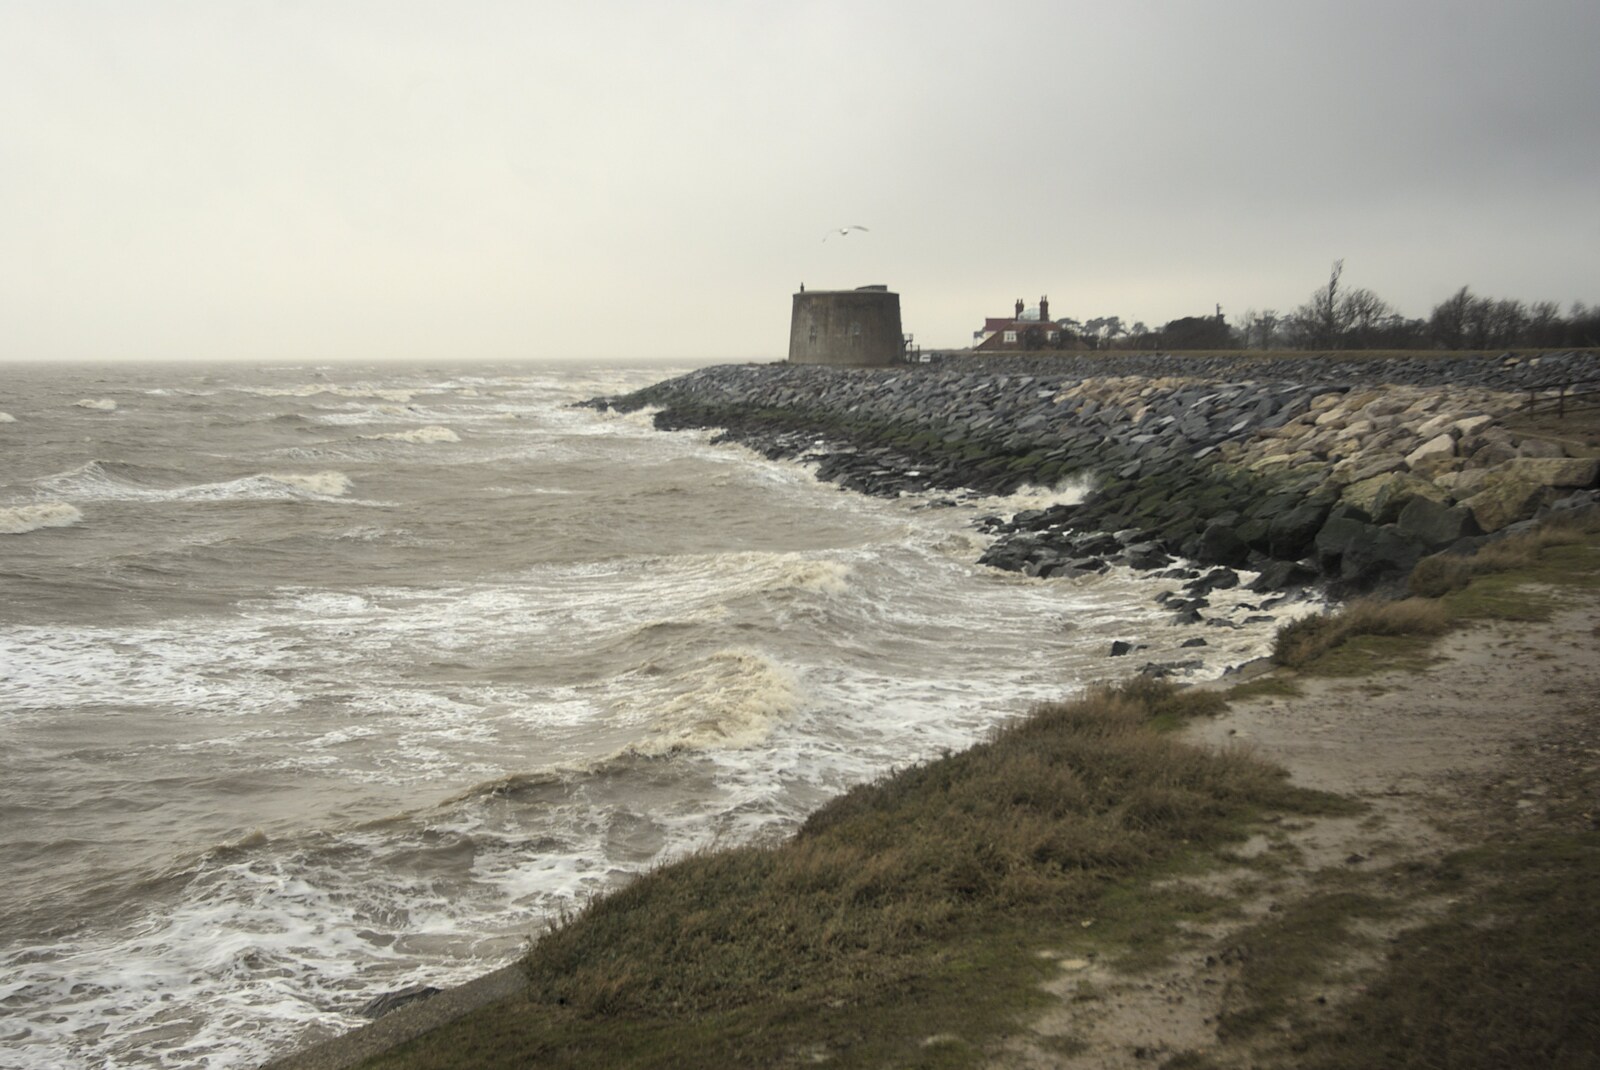 A stormy sea and a Martello tower, East Lane, Bawdsey from The BBs with Ed Sheeran, Fred's Haircut, and East Lane, Diss, Ipswich and Bawdsey  - 21st February 2010